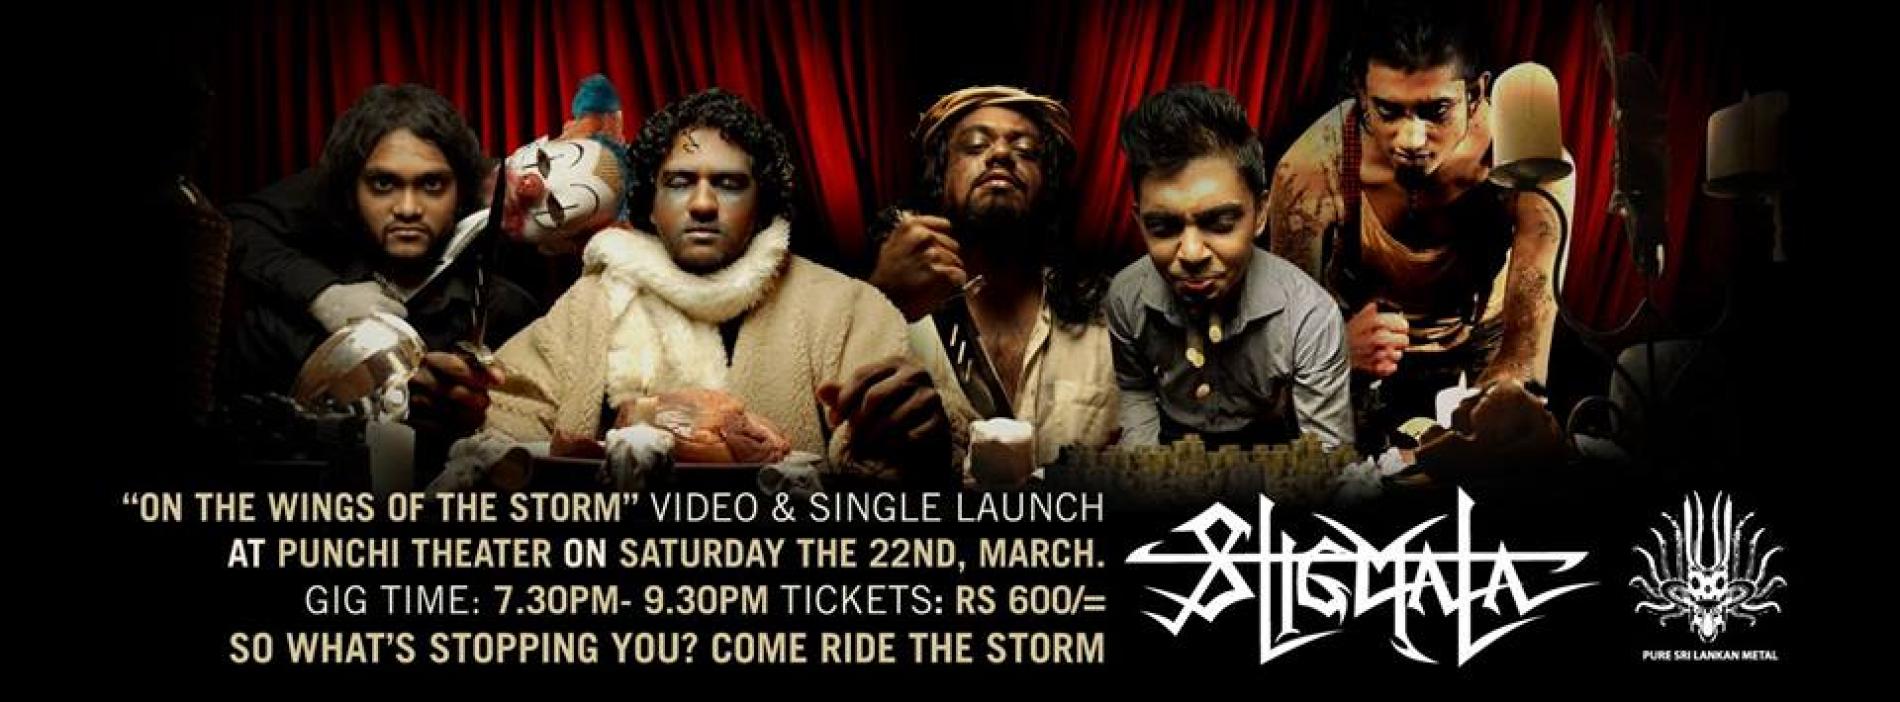 “On the Wings of the Storm” Official Video & Single Launch concert